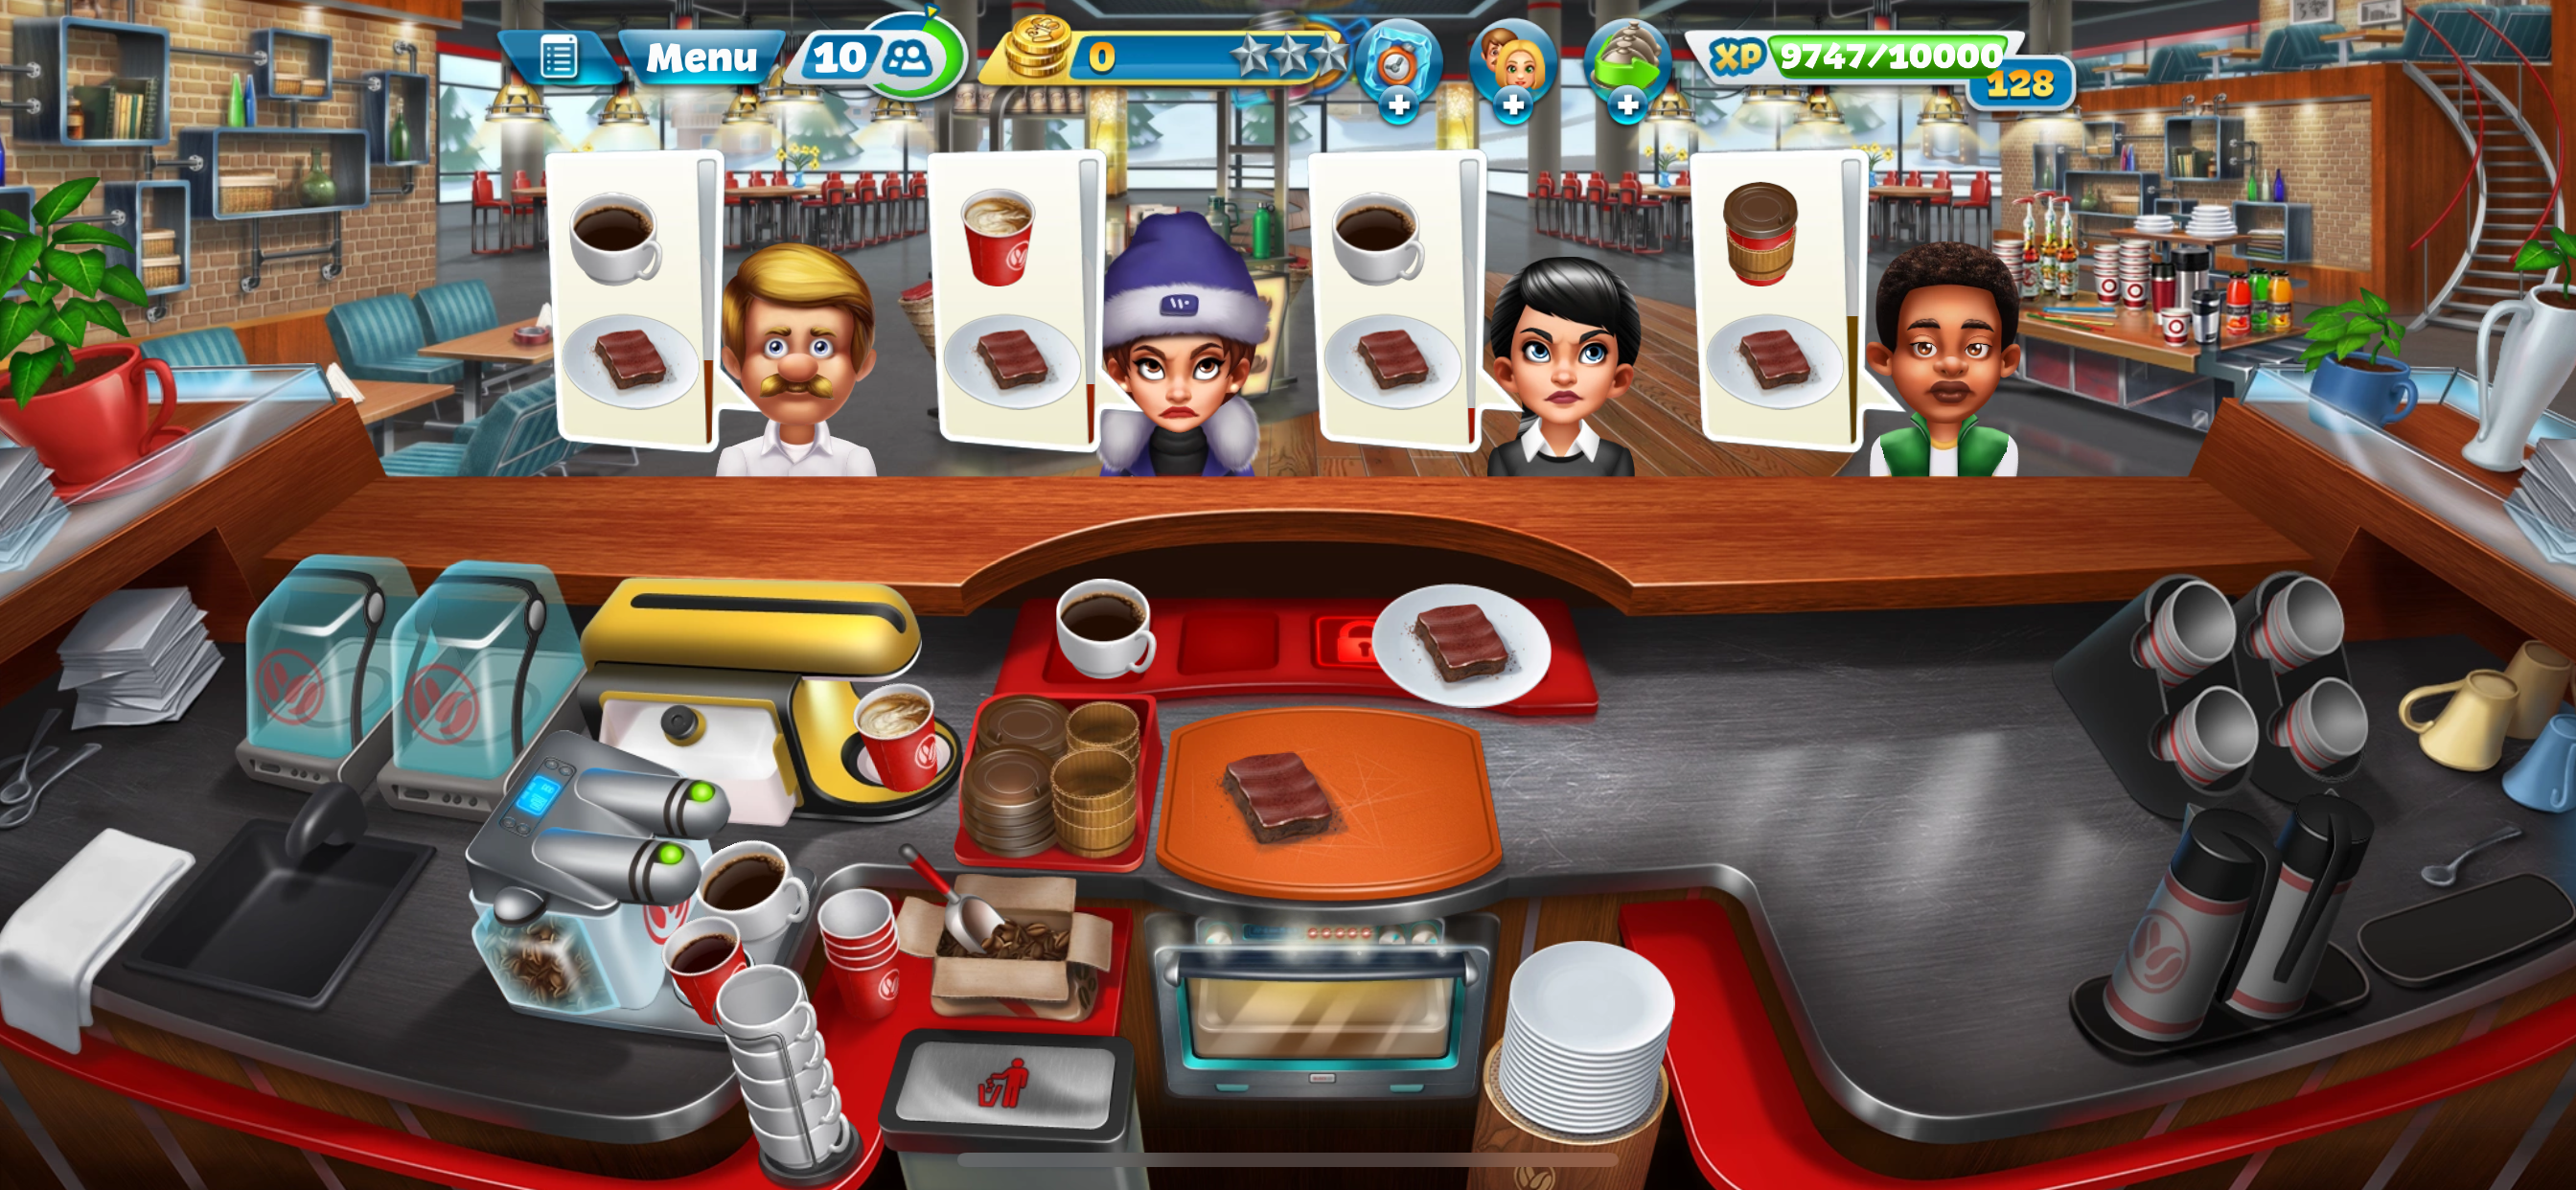 Cooking Fever time management game screenshot of coffee shop customers and orders to be filled for drinks and desserts.